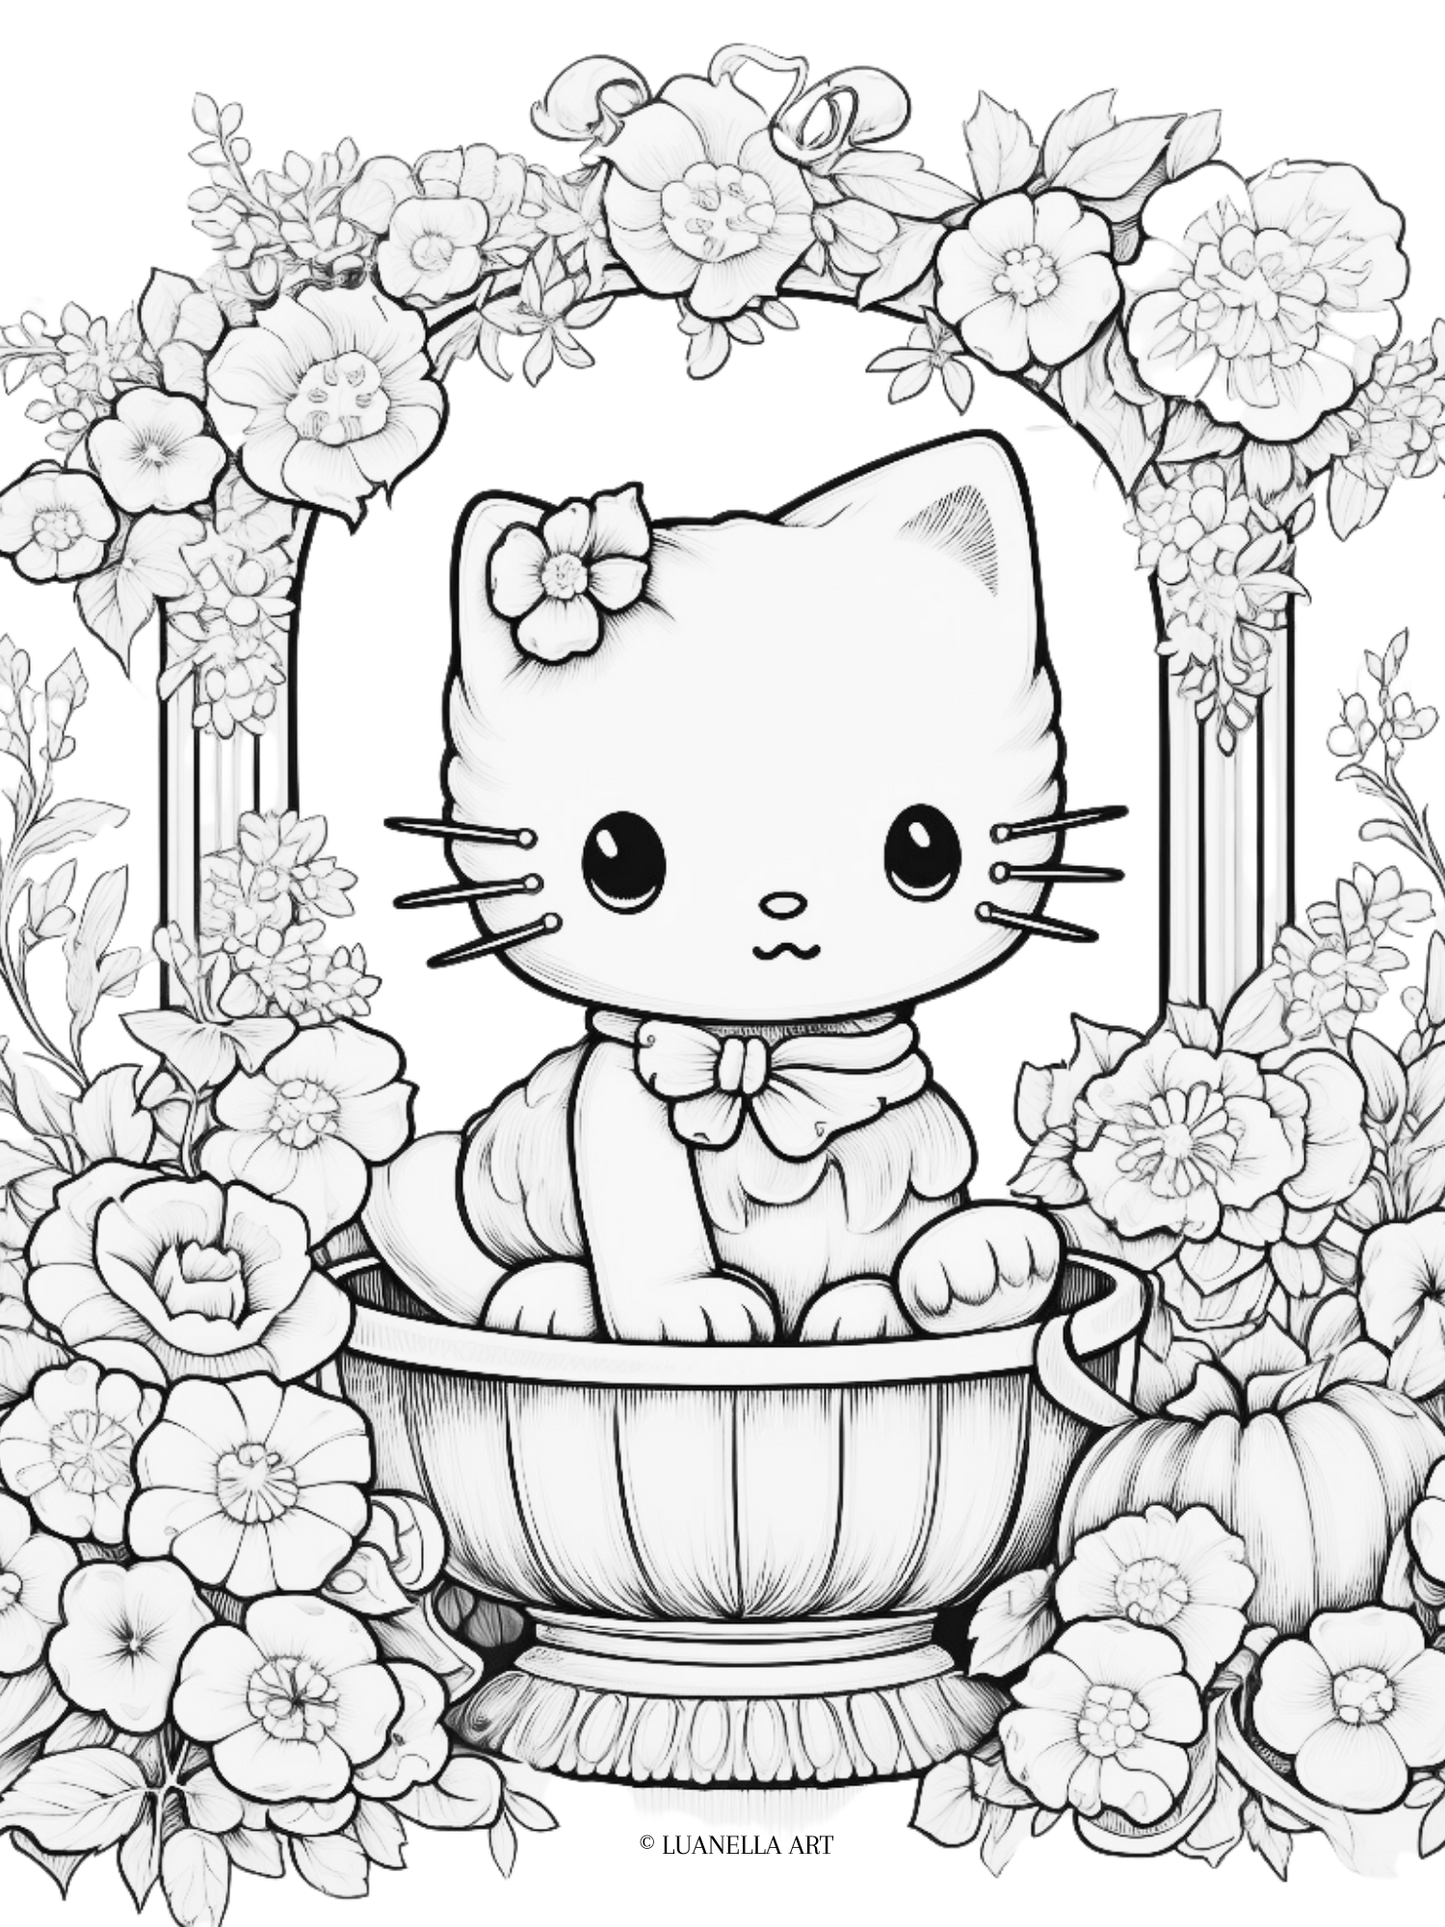 Sanrio character sitting in a bird bath, under a canopy of flowers | Coloring Page | Instant Digital Download